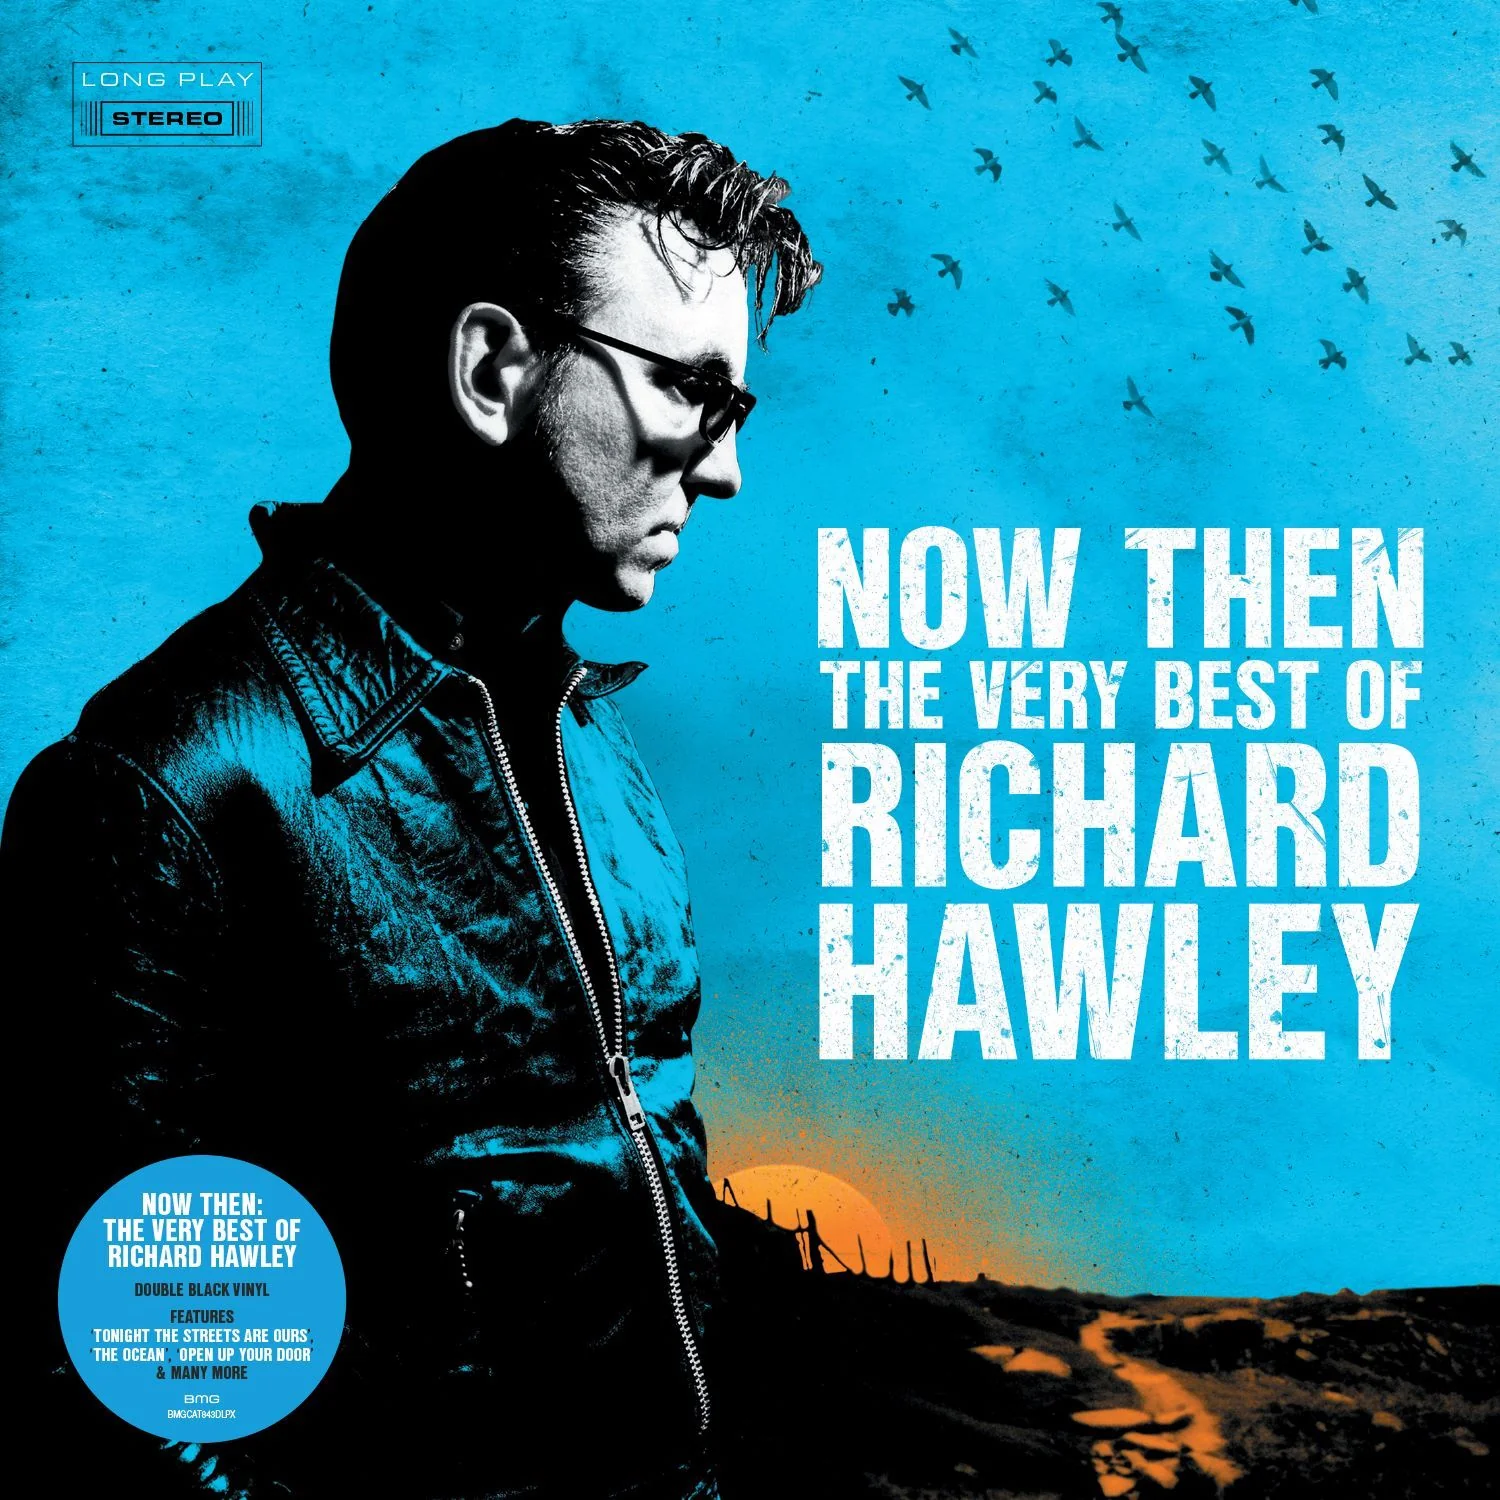 Richard Hawley "The Very Best Of" 2LP